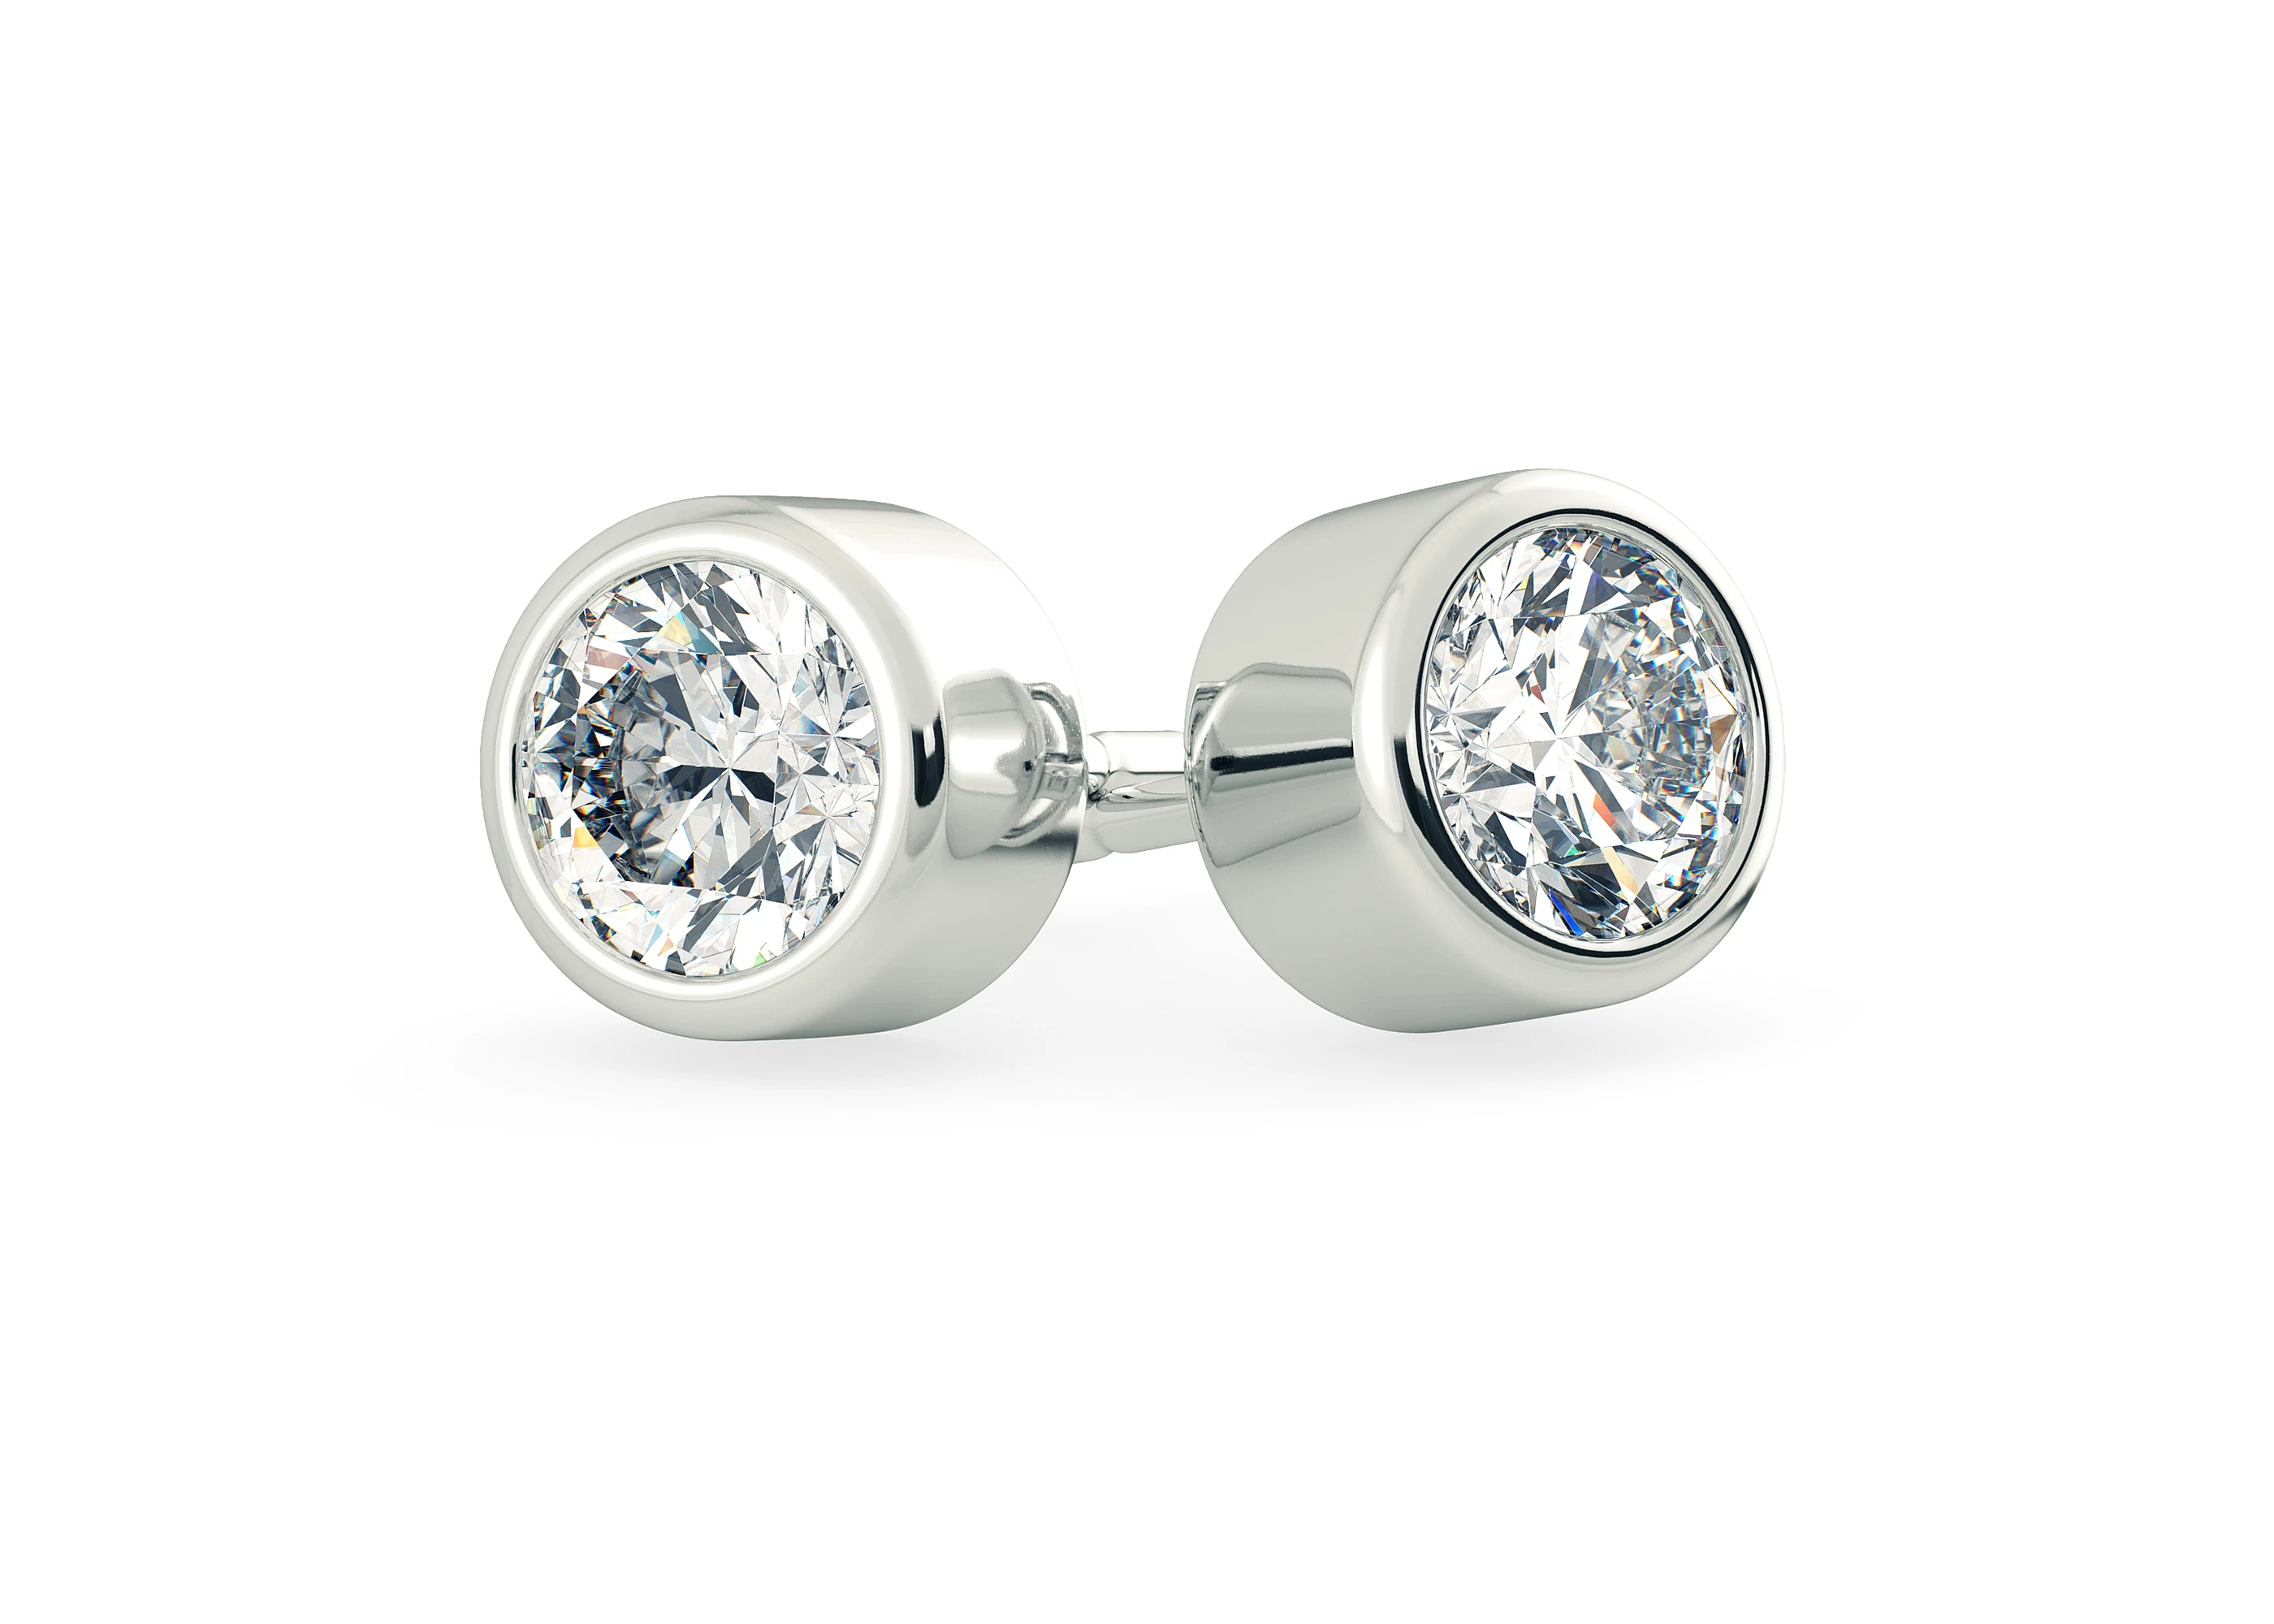 Carina Round Brilliant Diamond Stud Earrings in 18K White Gold with Butterfly Backs